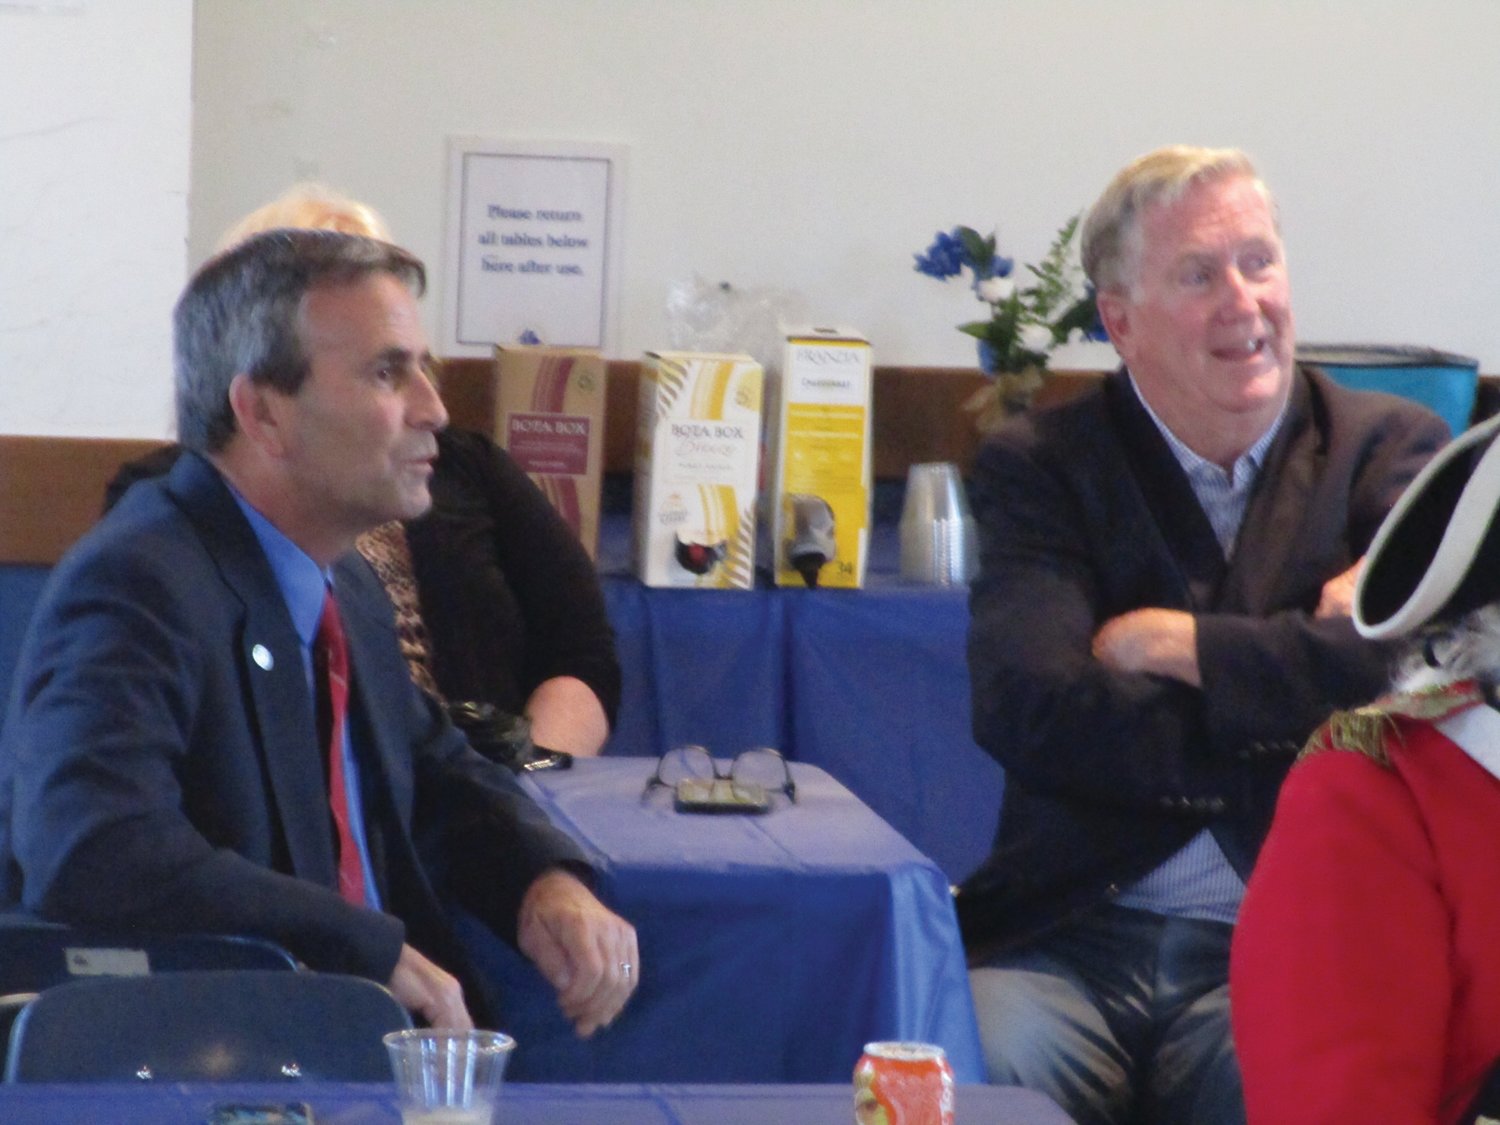 TALE OF TWO CITIES: Warwick Mayor Frank Picozzi, left, and Cranston Mayor Ken Hopkins look on during last week’s installation ceremony for the Gaspee Days Committee.